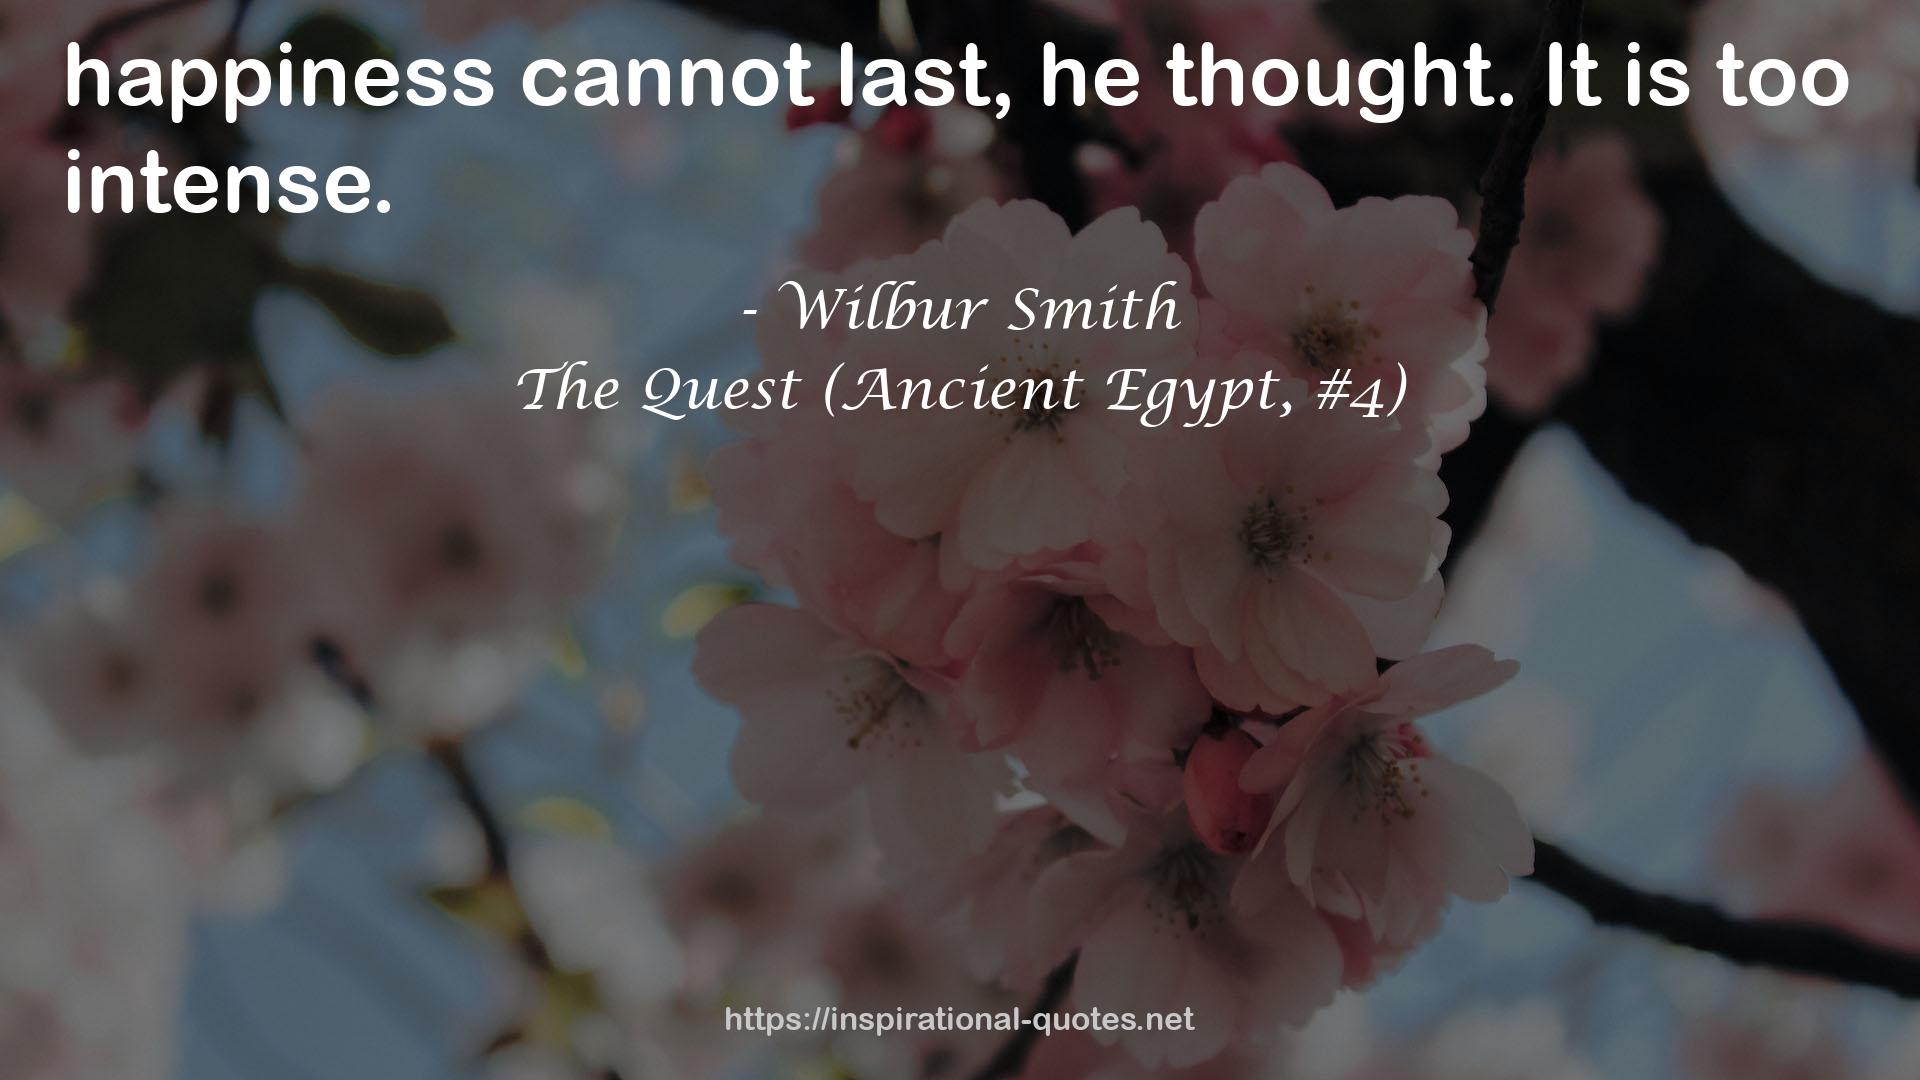 The Quest (Ancient Egypt, #4) QUOTES